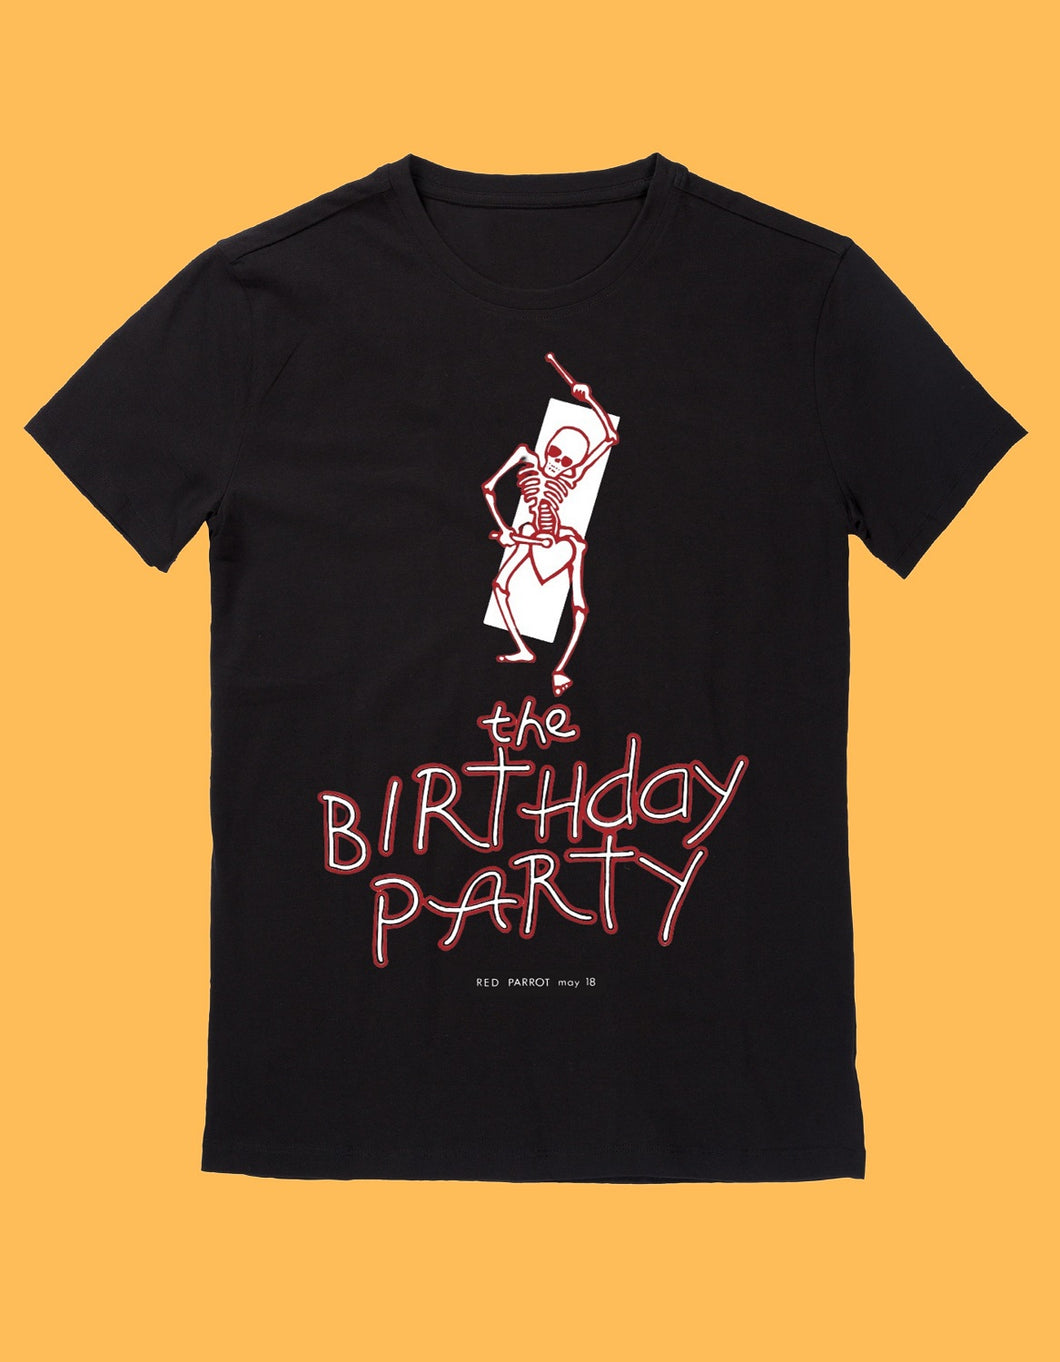 THE BIRTHDAY PARTY - RED PARROT - T-SHIRT